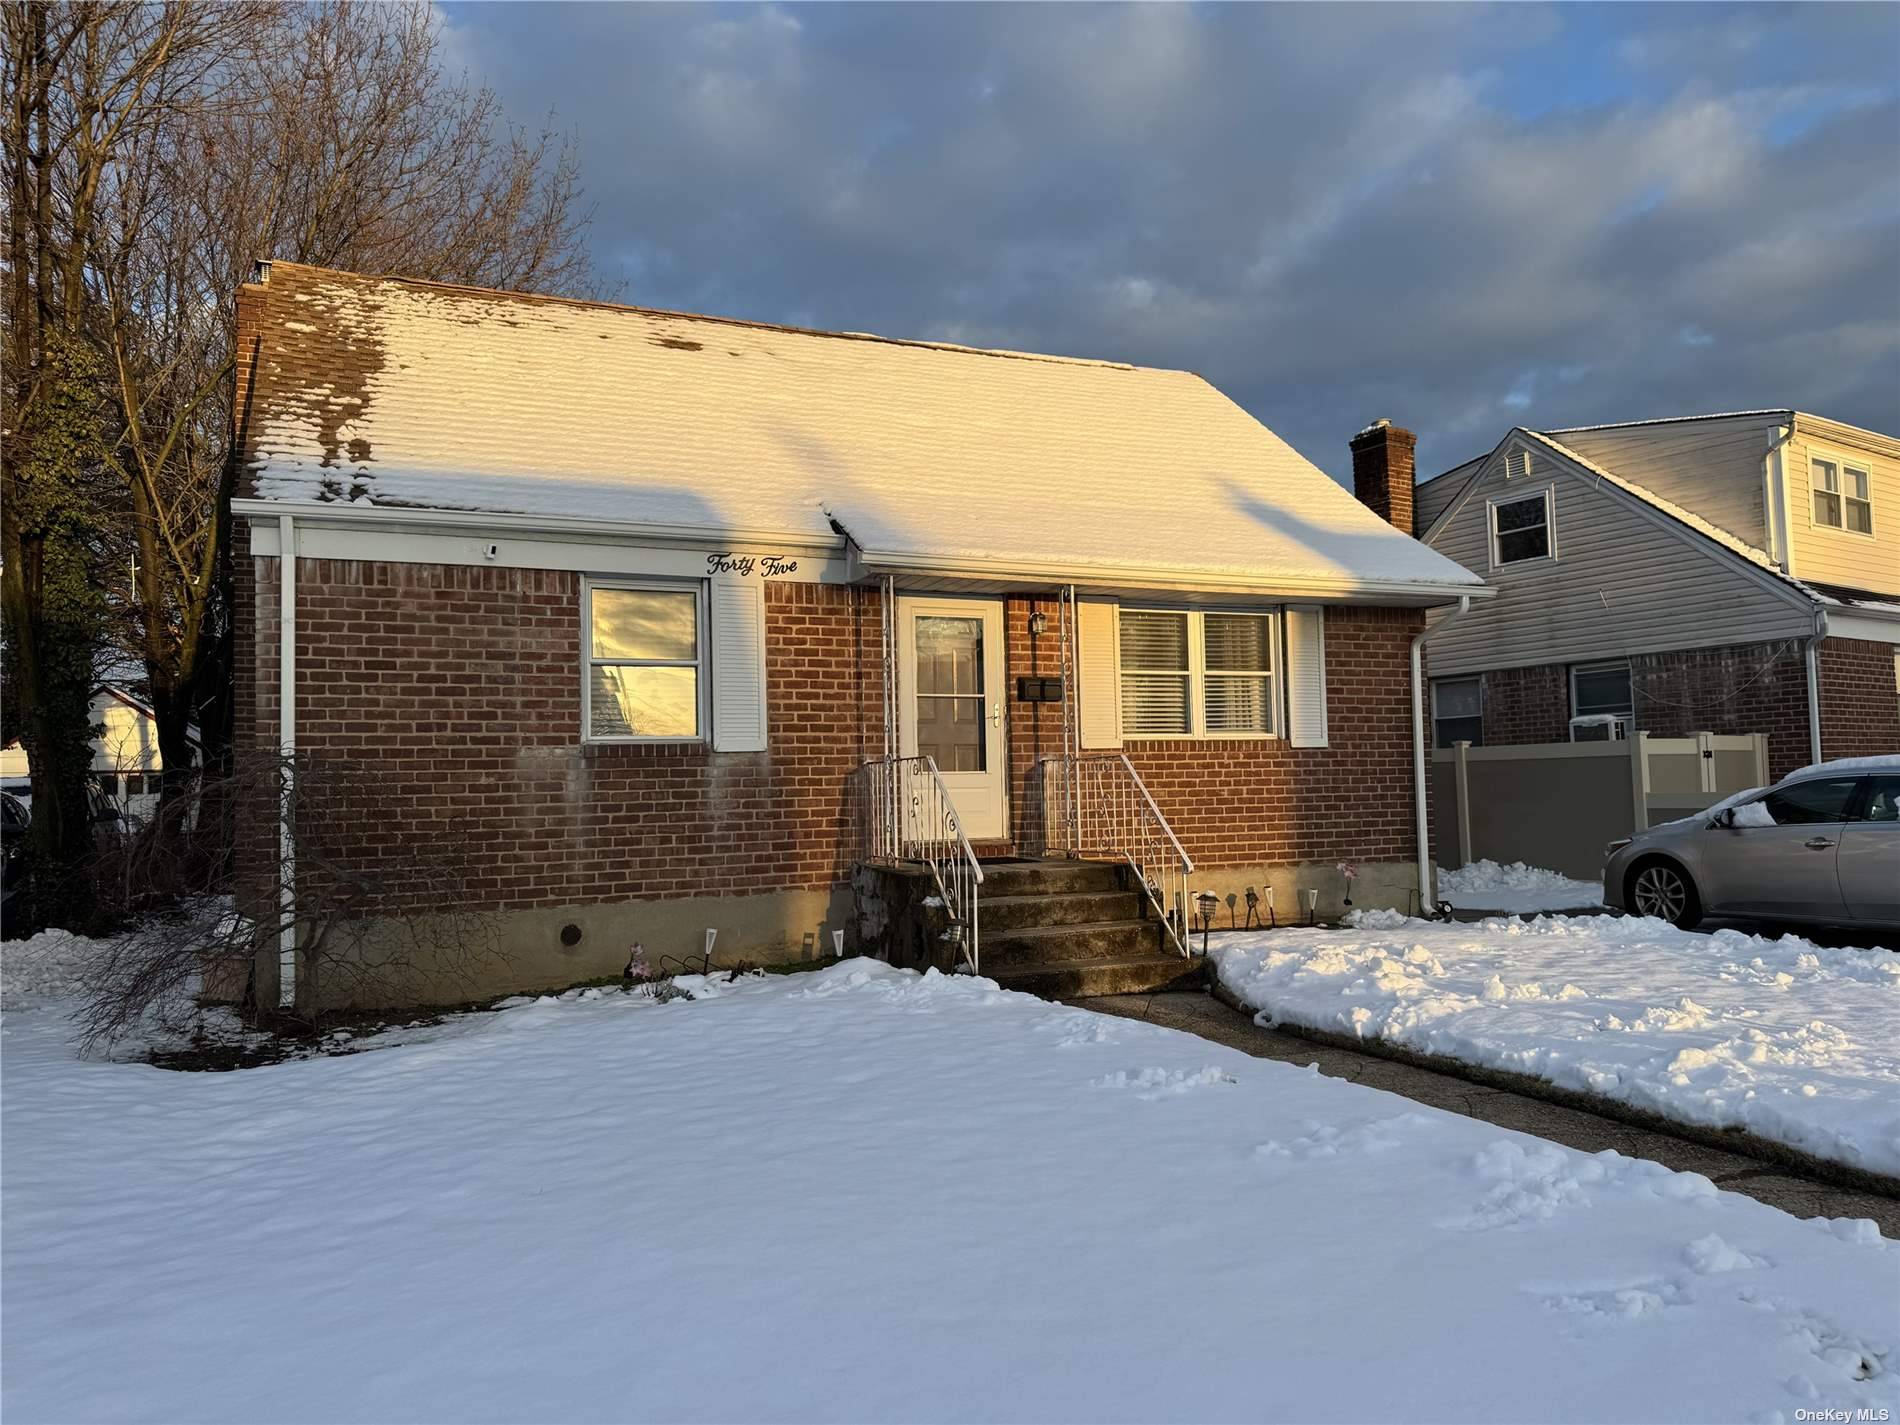 BRICK CAPE FEATURES 4 BEDROOMS, FULL BATH, EIK, DR, DETACHED GARAGE, AND FULL BASEMENT WITH OSE !